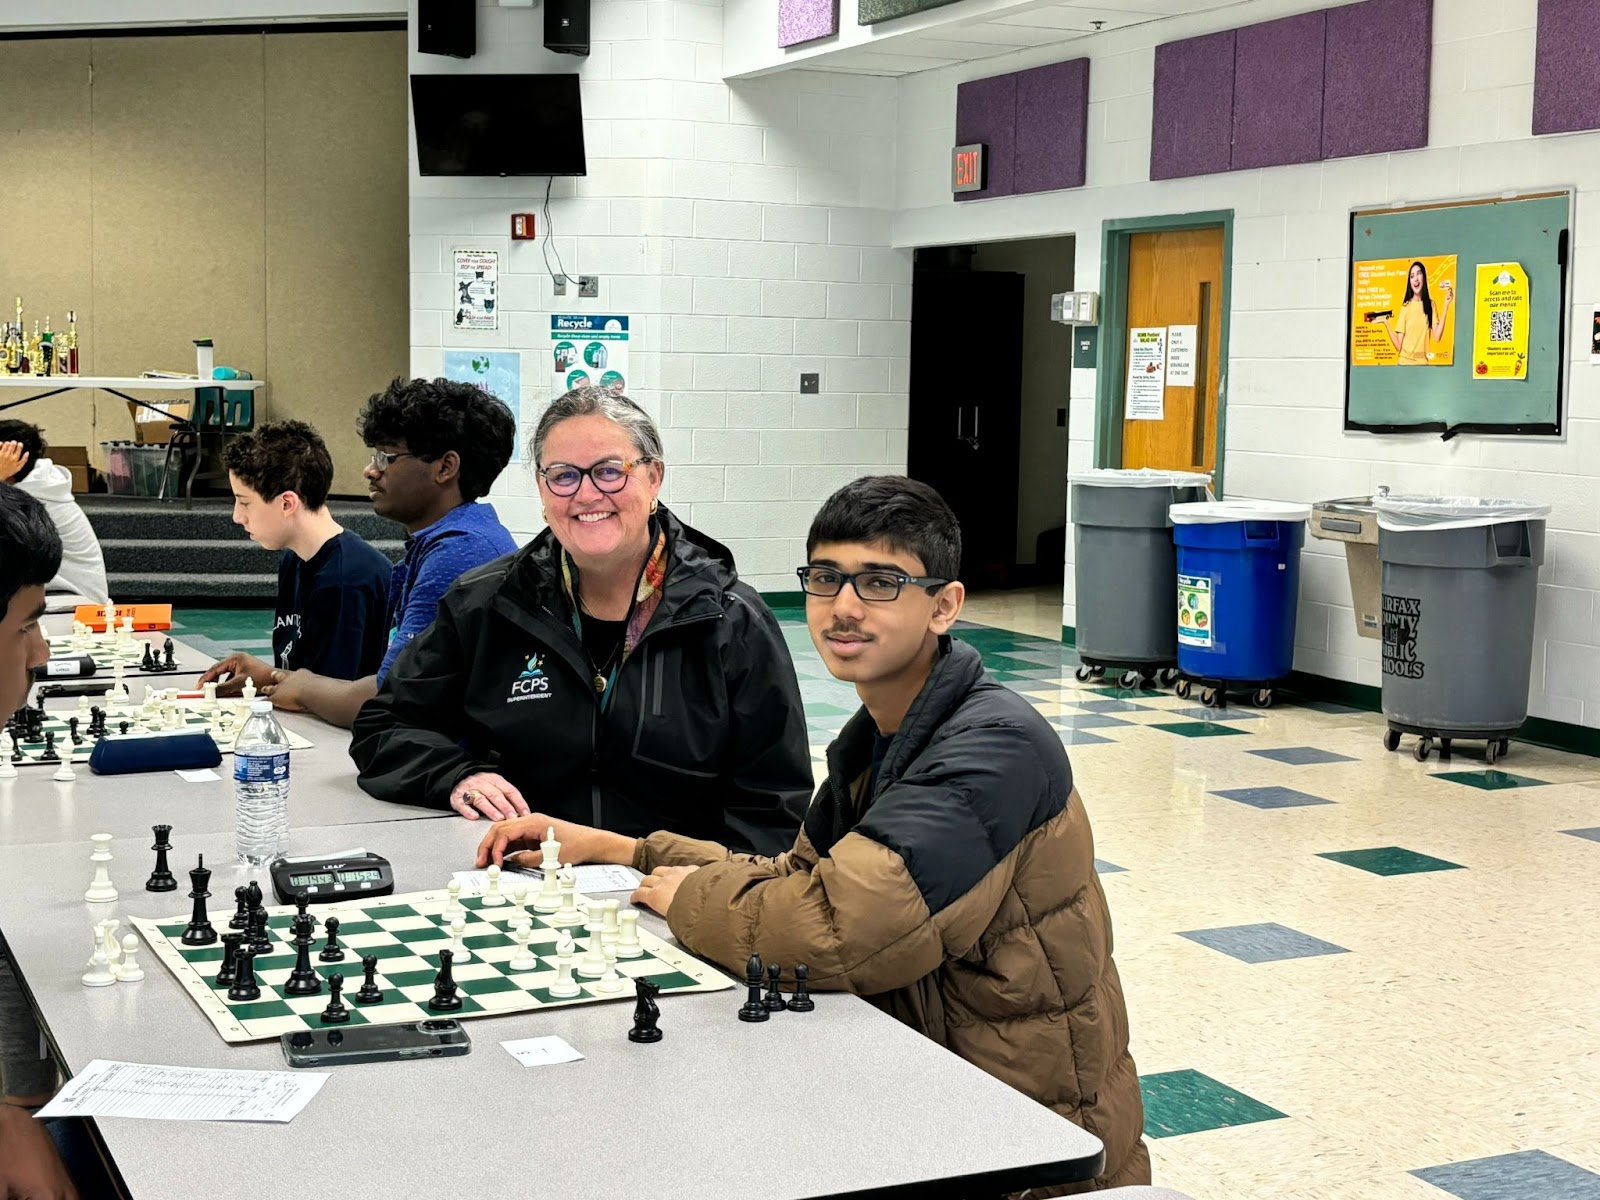 Dr. Reid with a student at the Rachel Carson MS charity chess tournament